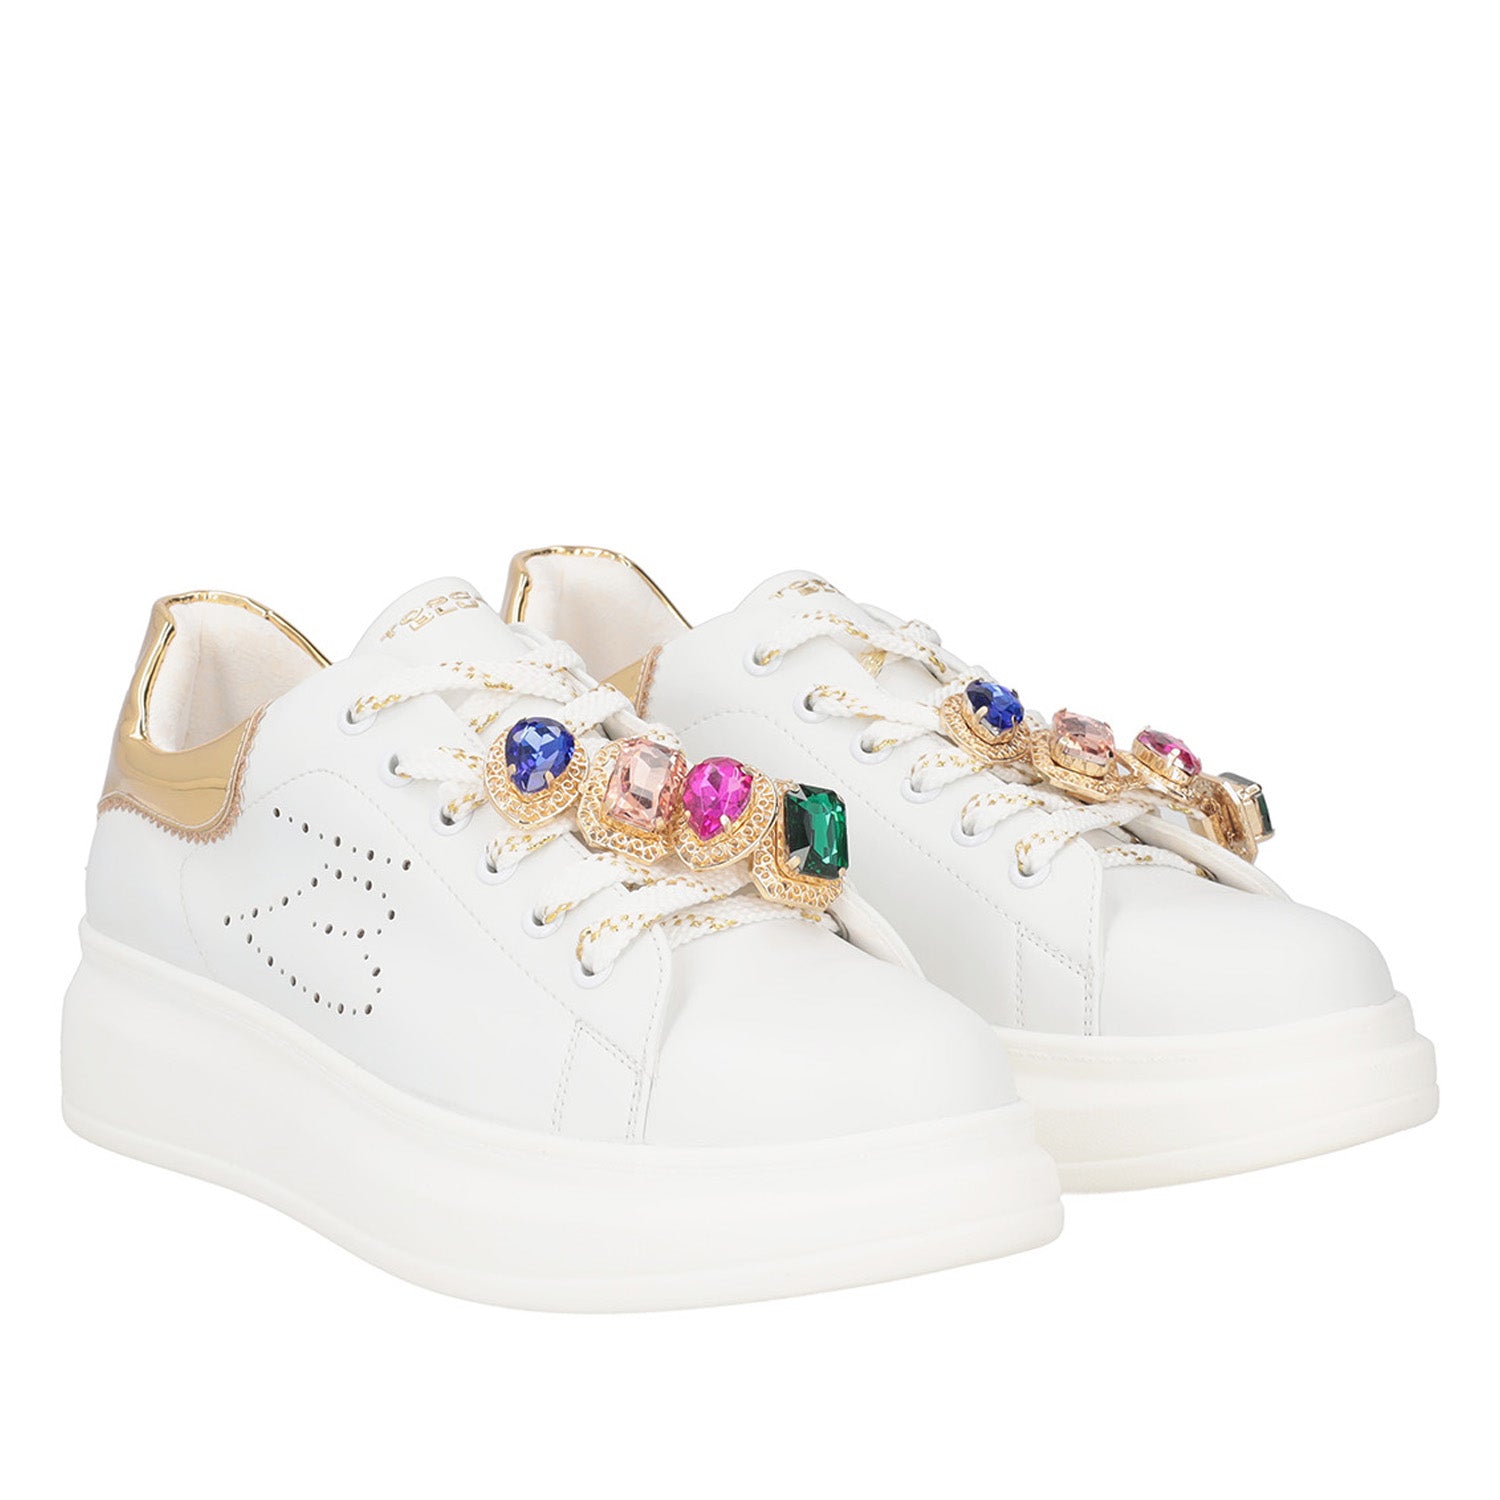 WHITE/GOLD GLAMOUR SNEAKER WITH RHINESTONE CHAIN